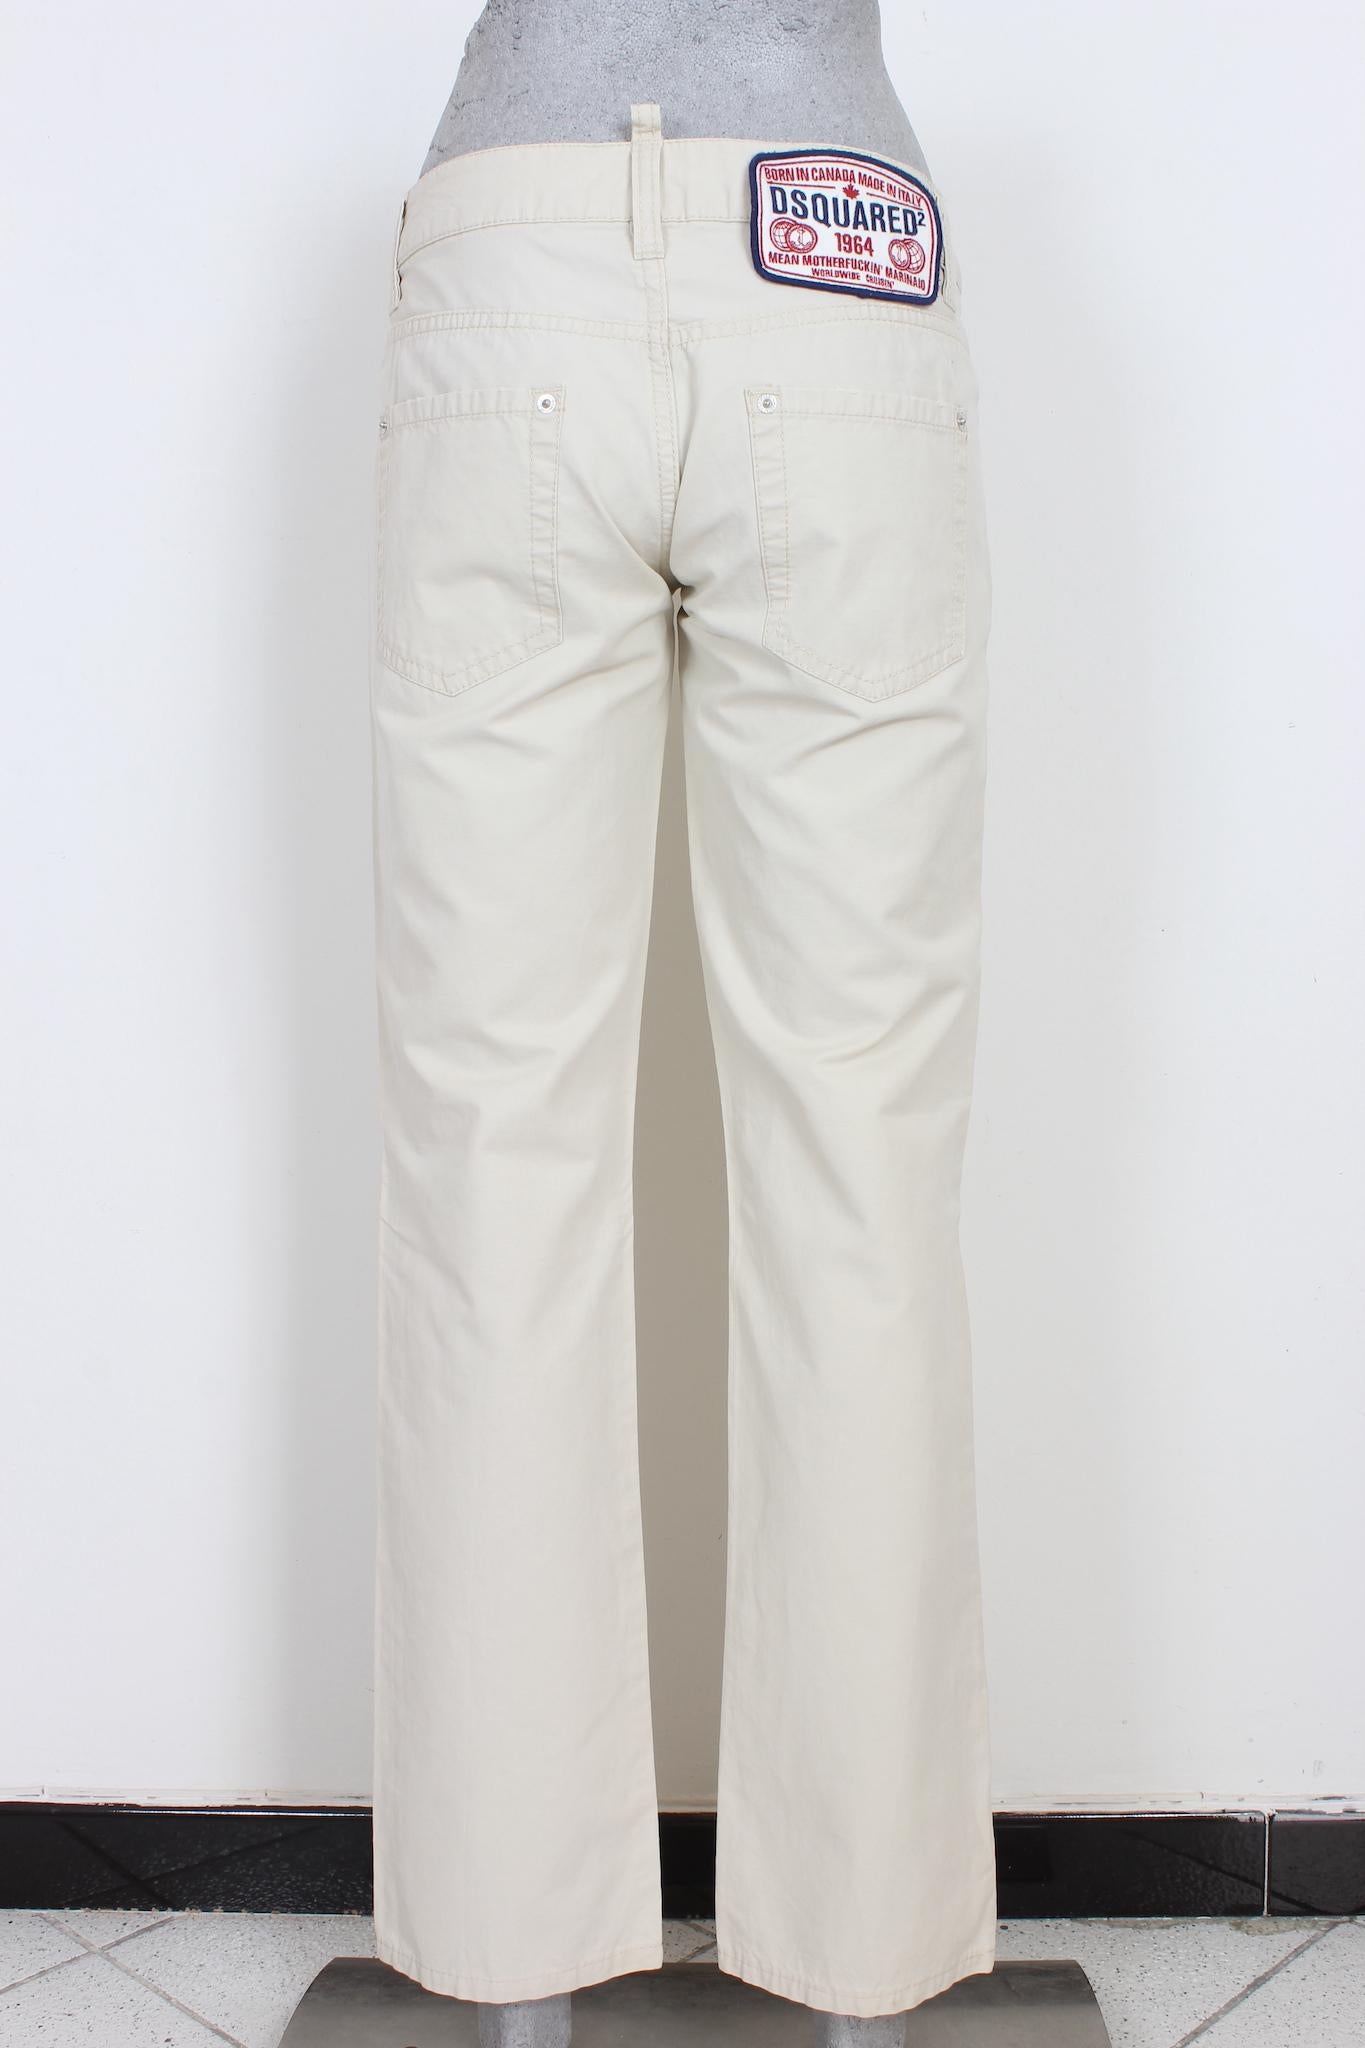 Dsquared 2000s beige trousers. Straight model, narrow leg, in cotton. Made in italy.

Size: 44 It 10 Us 12 Uk

Waist: 43 cm
Length: 95 cm
Crotch length: 75 cm
Hem: 20 cm